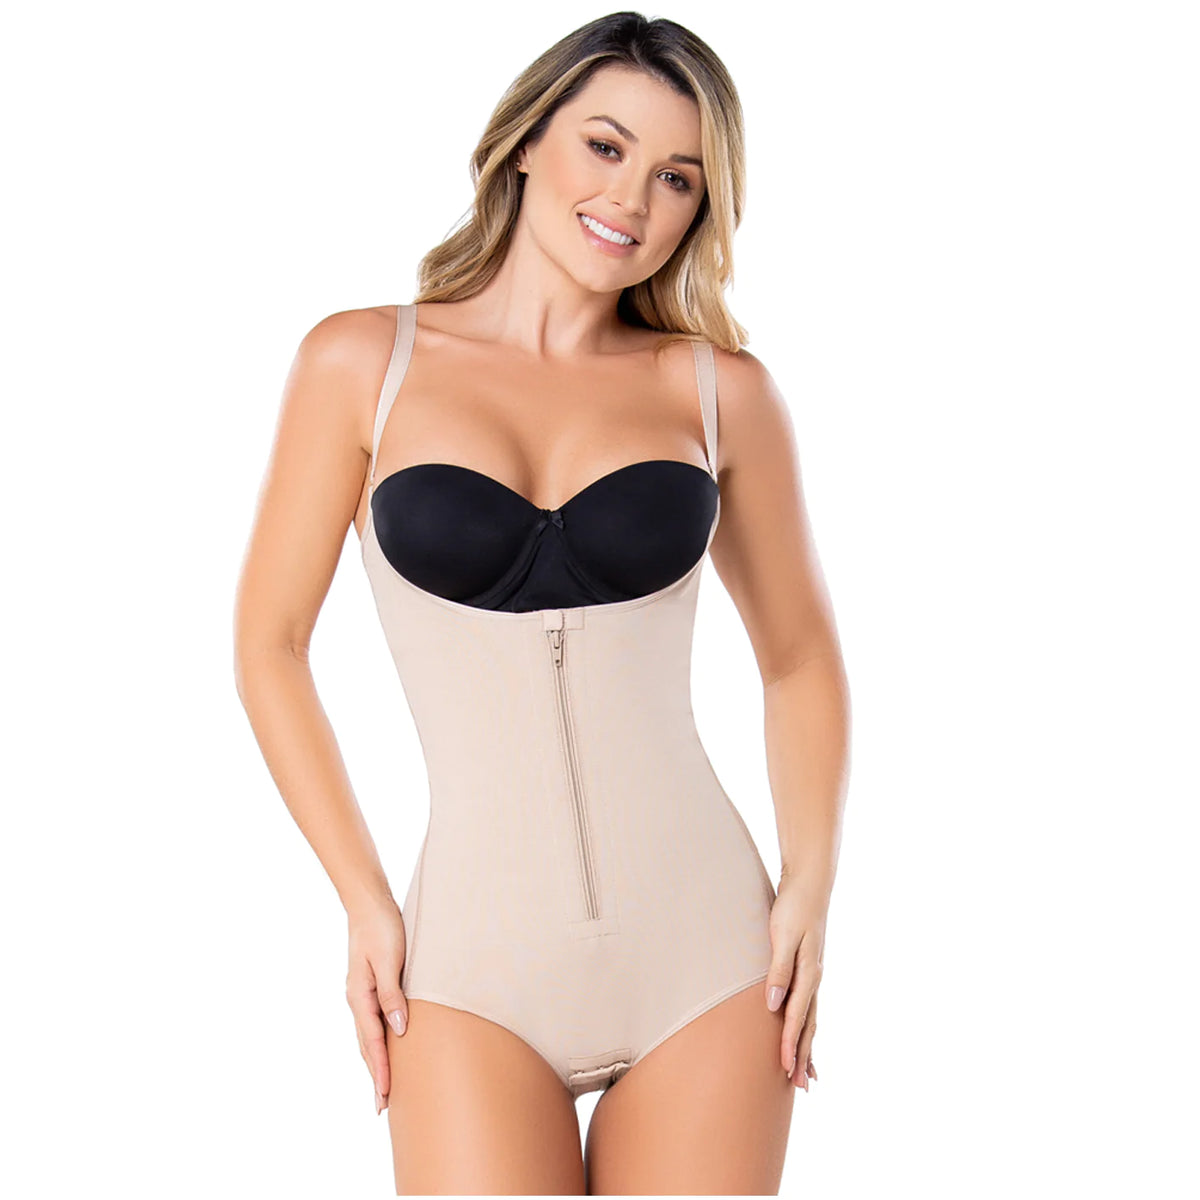 My Perfect Shape by Diane - Diane 2411 It's recommended to wear every day  to slim your abdomen and look perfect. Sizes: From 32 to 44. Price; $559  ttd Powenet. High compression